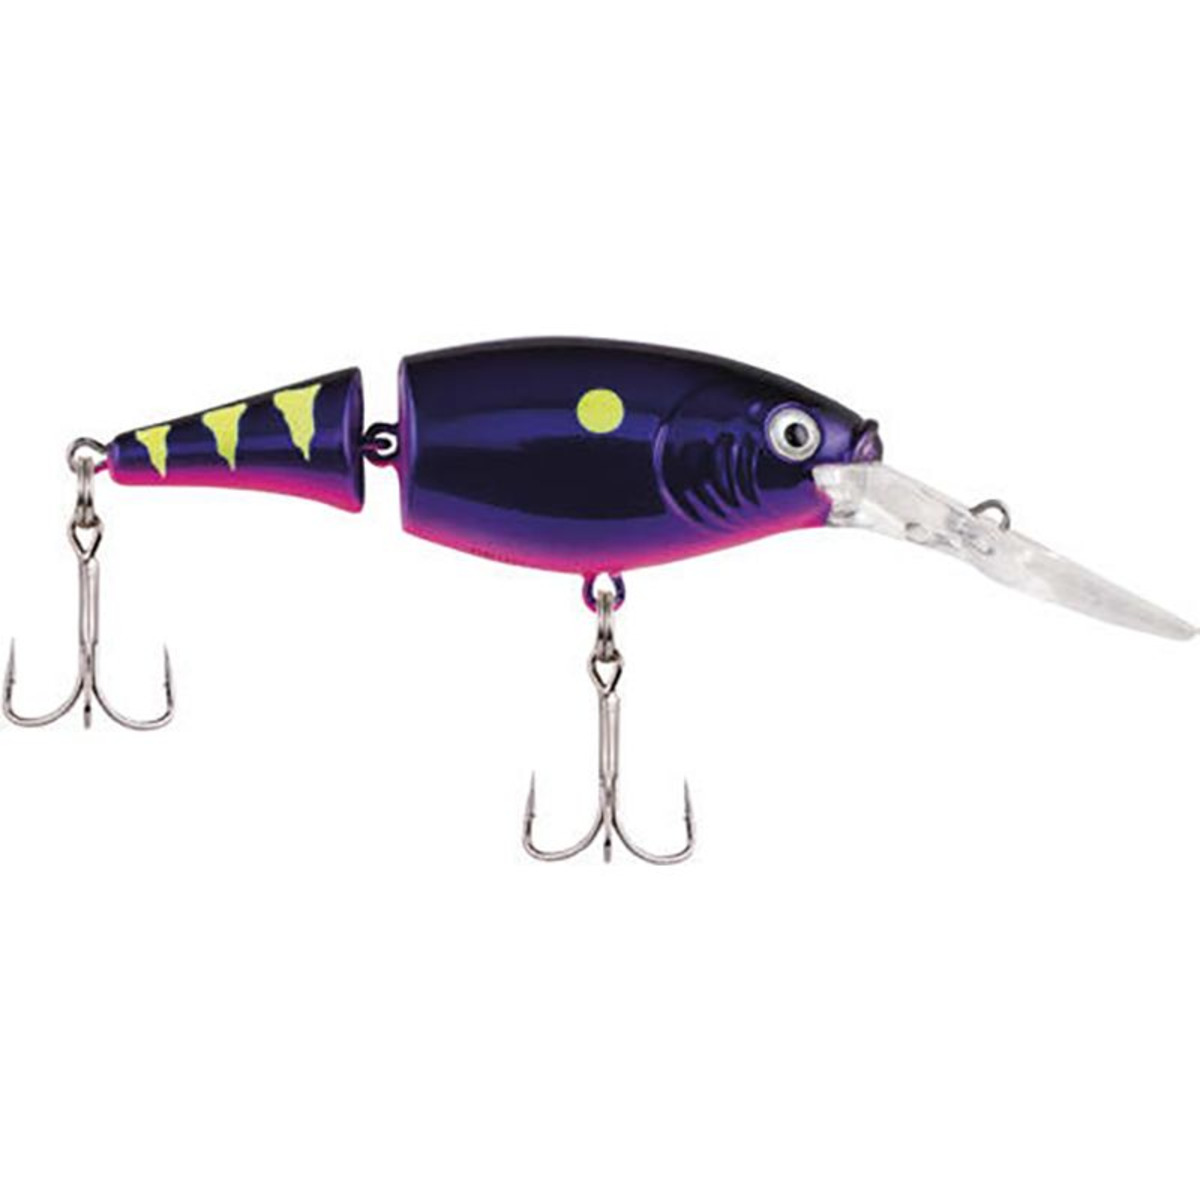 Berkley Flicker Shad Jointed Fire Tail - 5 cm - 6 g - Chrome Candy